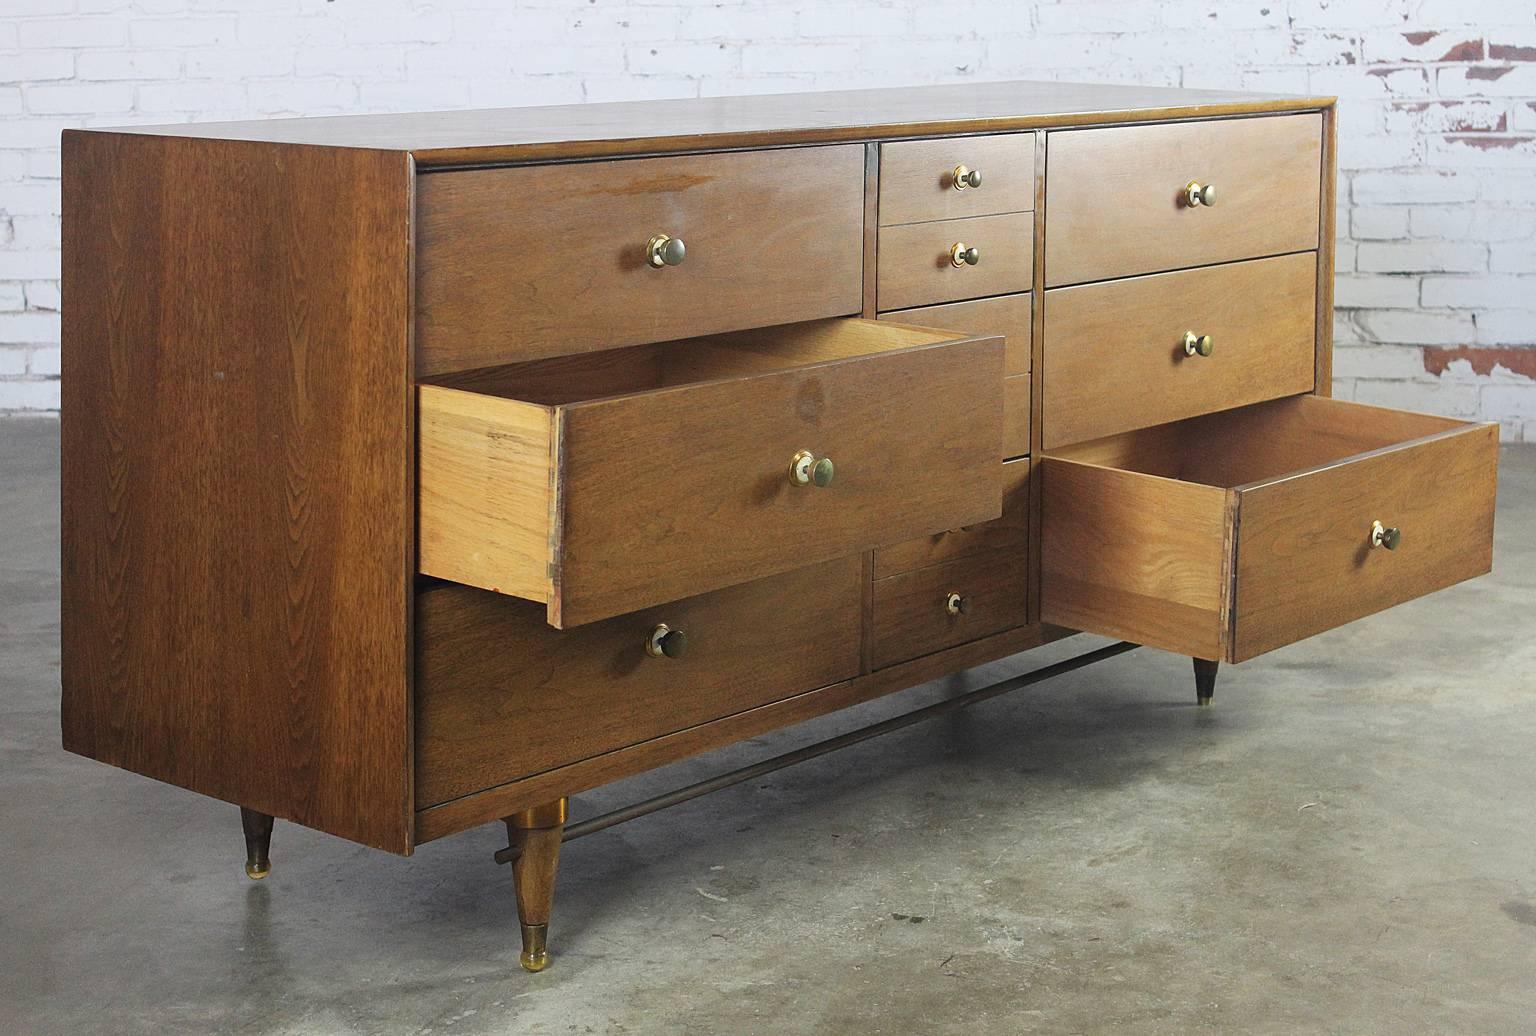 American Mid-Century Modern Walnut Low Dresser Chest of Drawers by National Furniture Co.